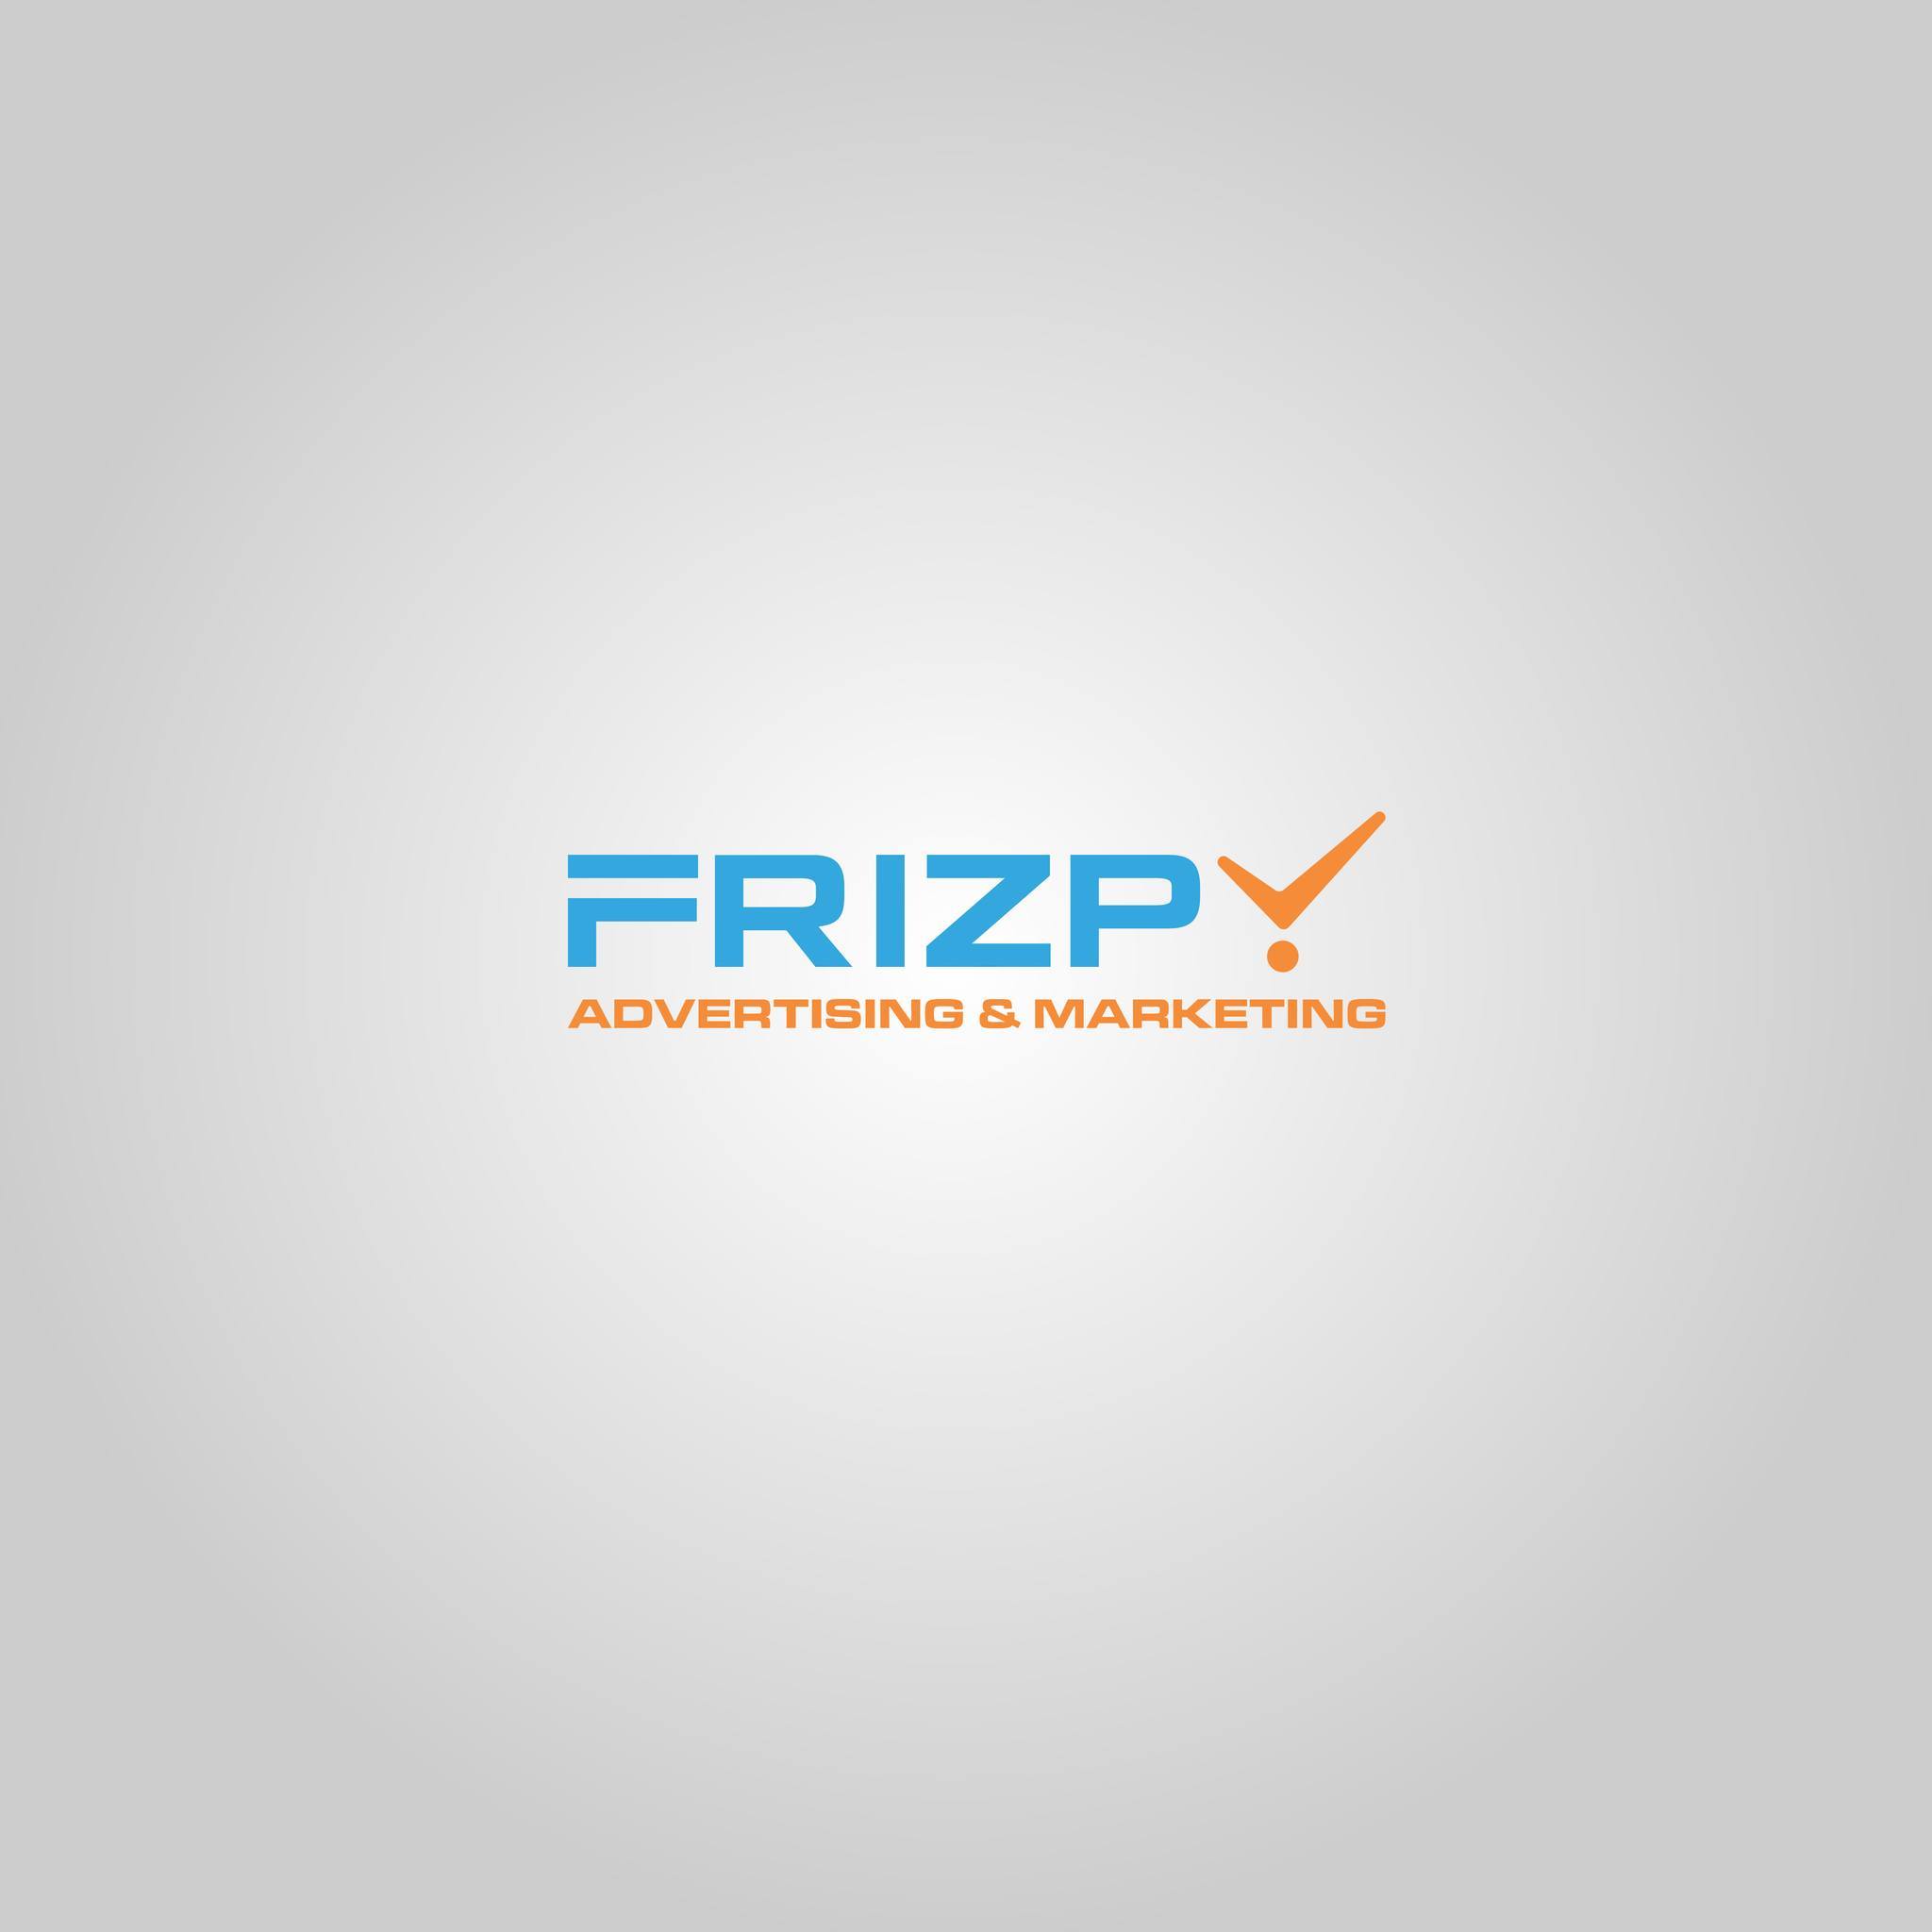 https://www.pakpositions.com/company/frizpymarketing-and-advertisement